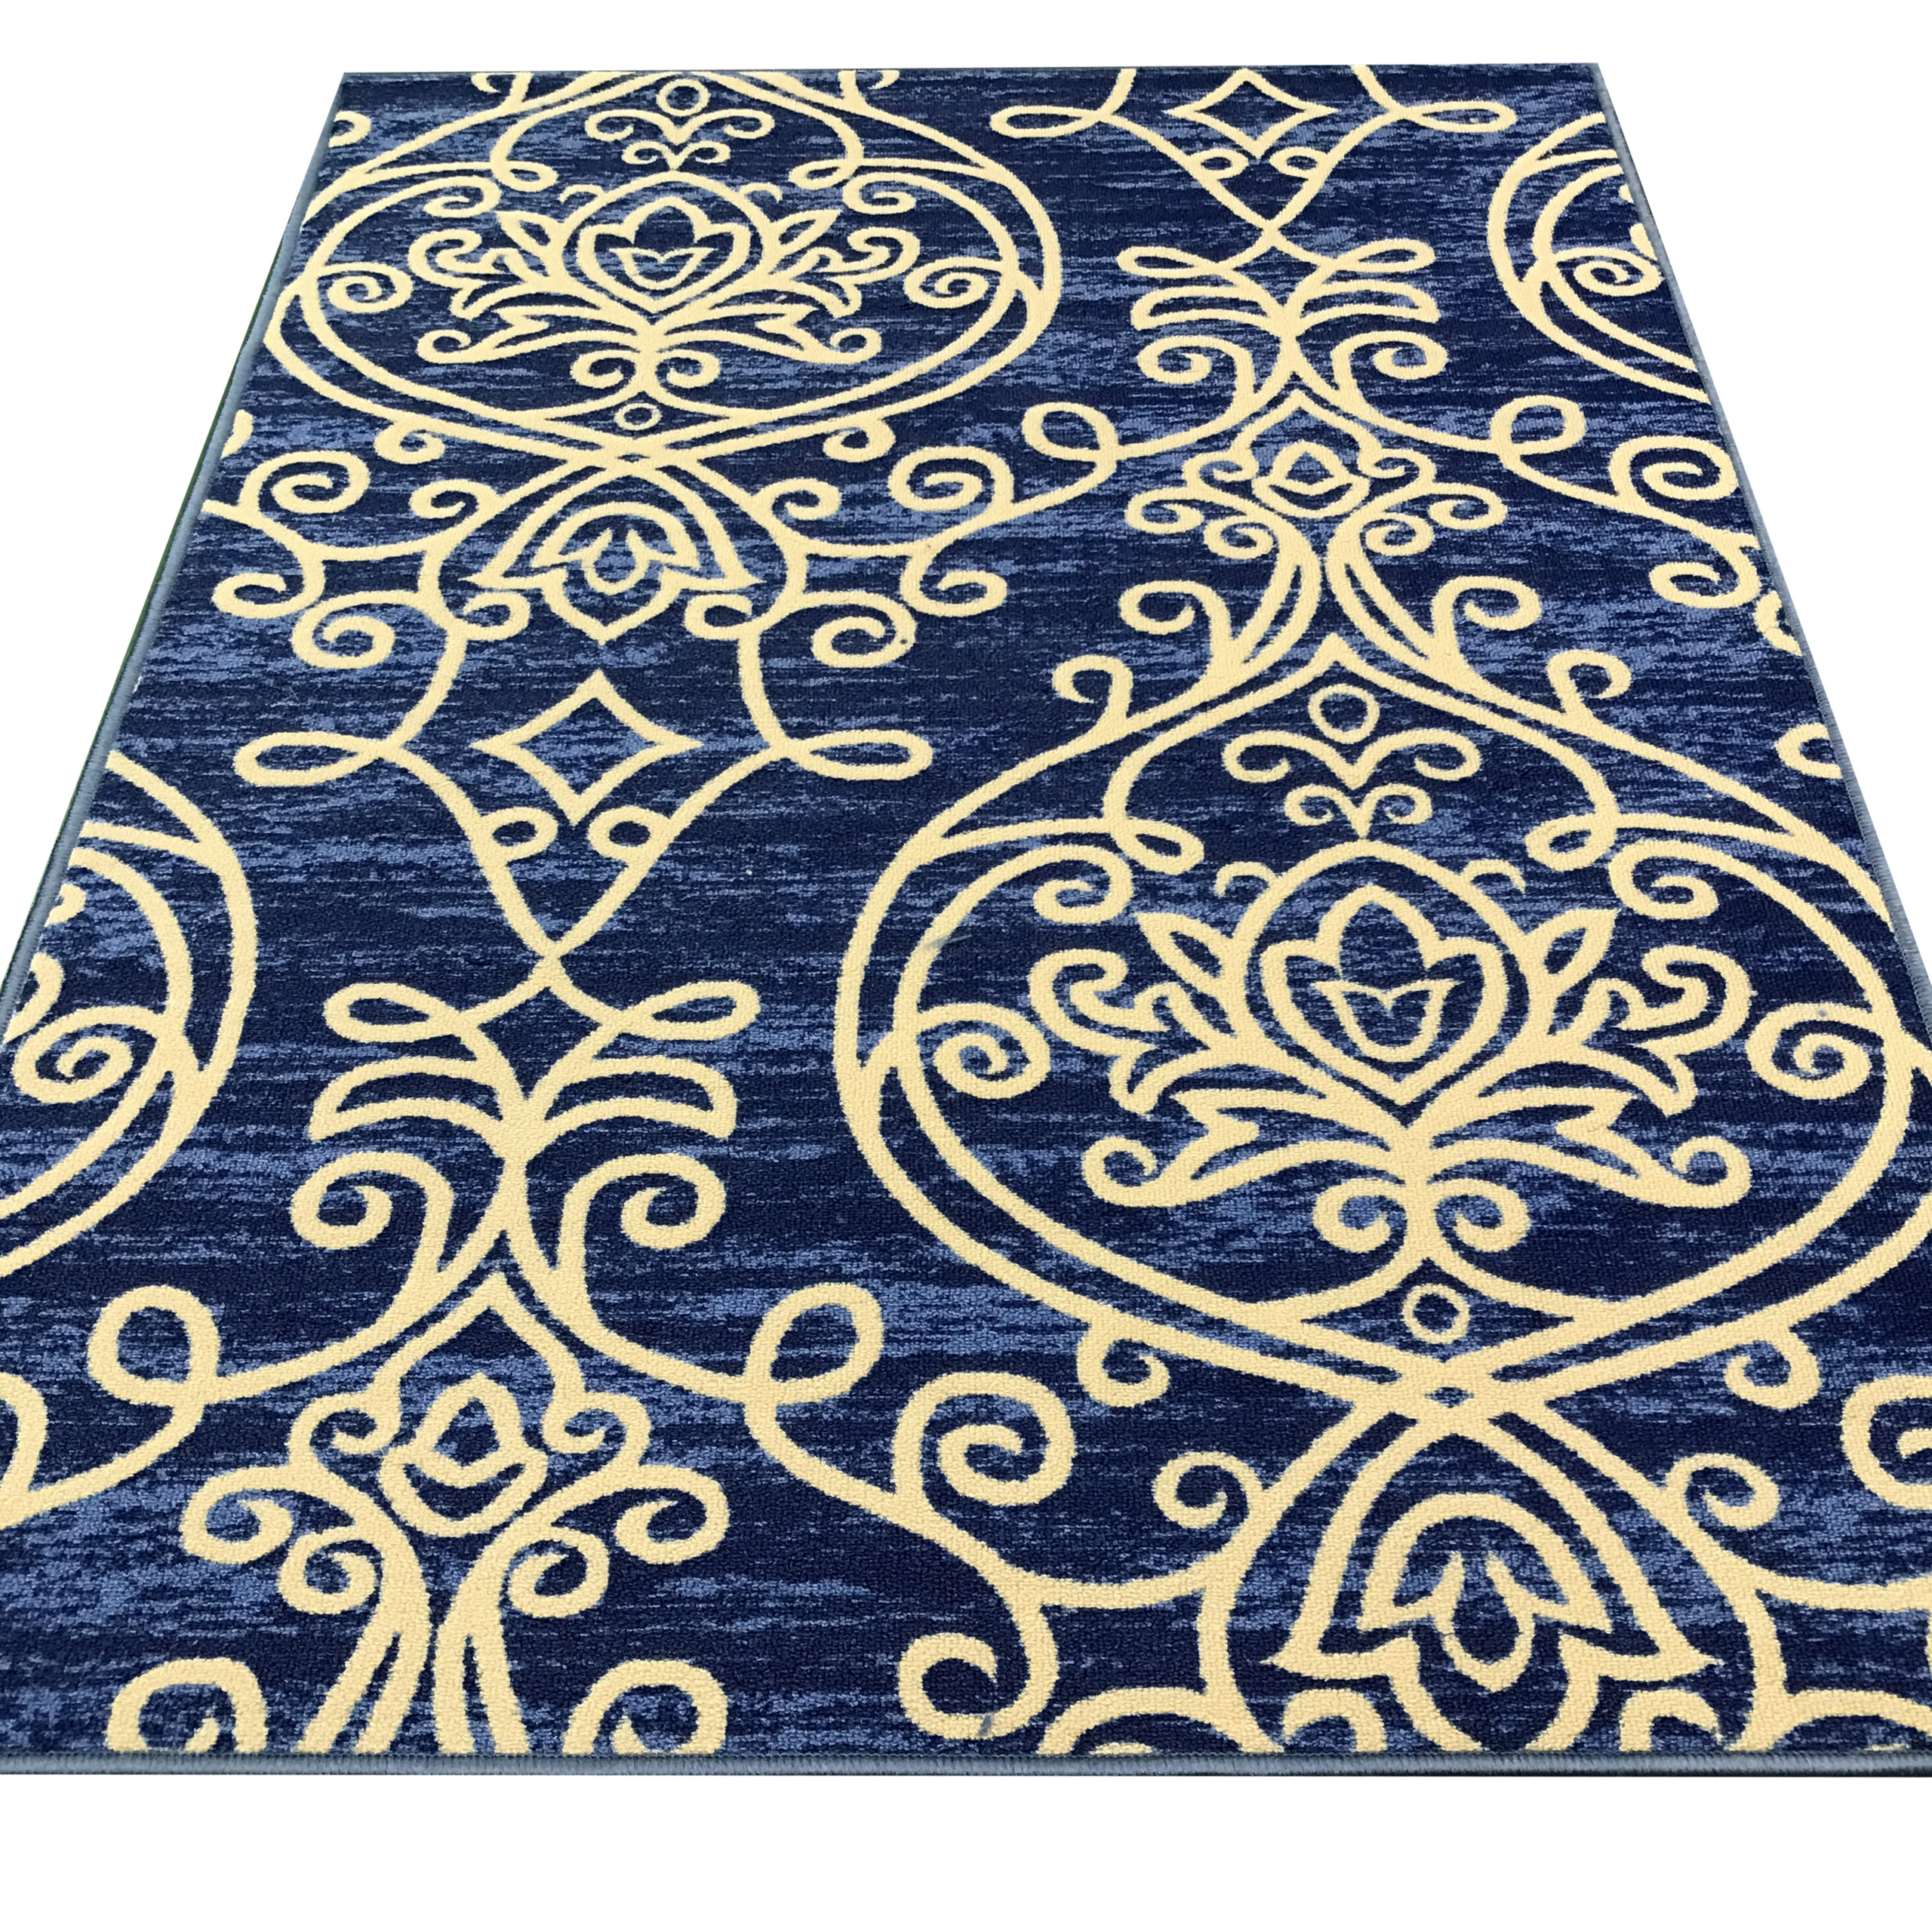 https://visualhunt.com/photos/12/toccoa-trendy-non-skid-rubber-backed-multicolor-area-rug-1.jpg